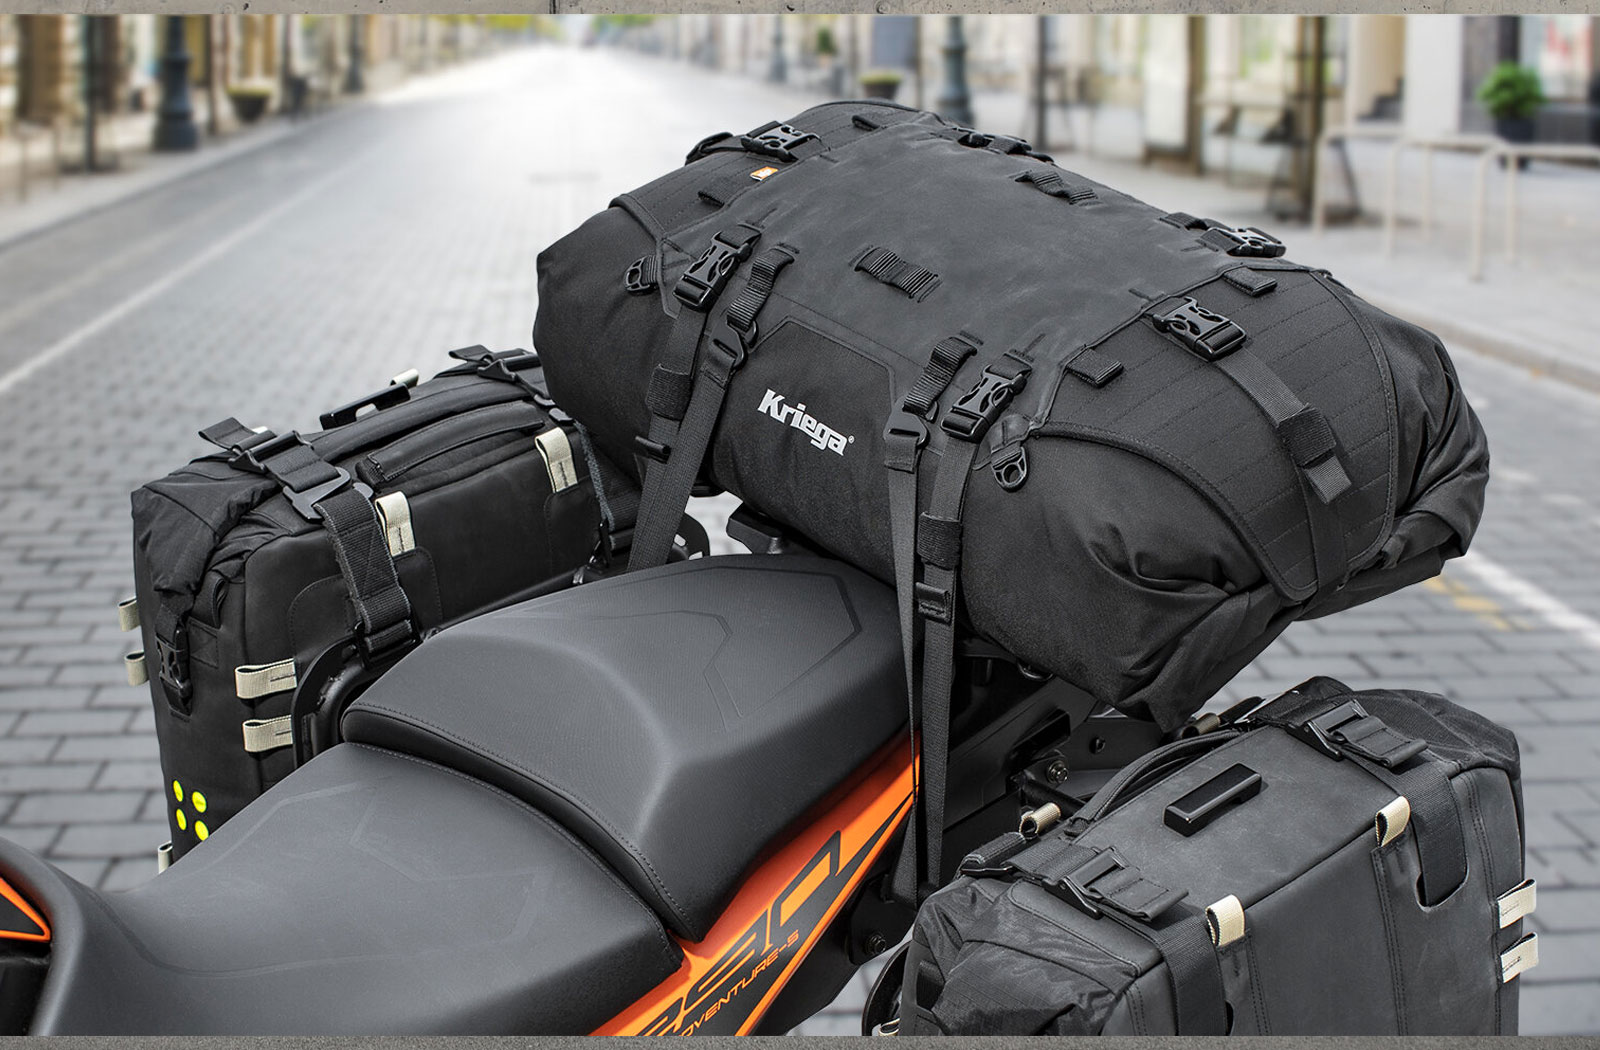 Upgrade Your Motorcycle Touring Gear with Nelson Rigg Luggage